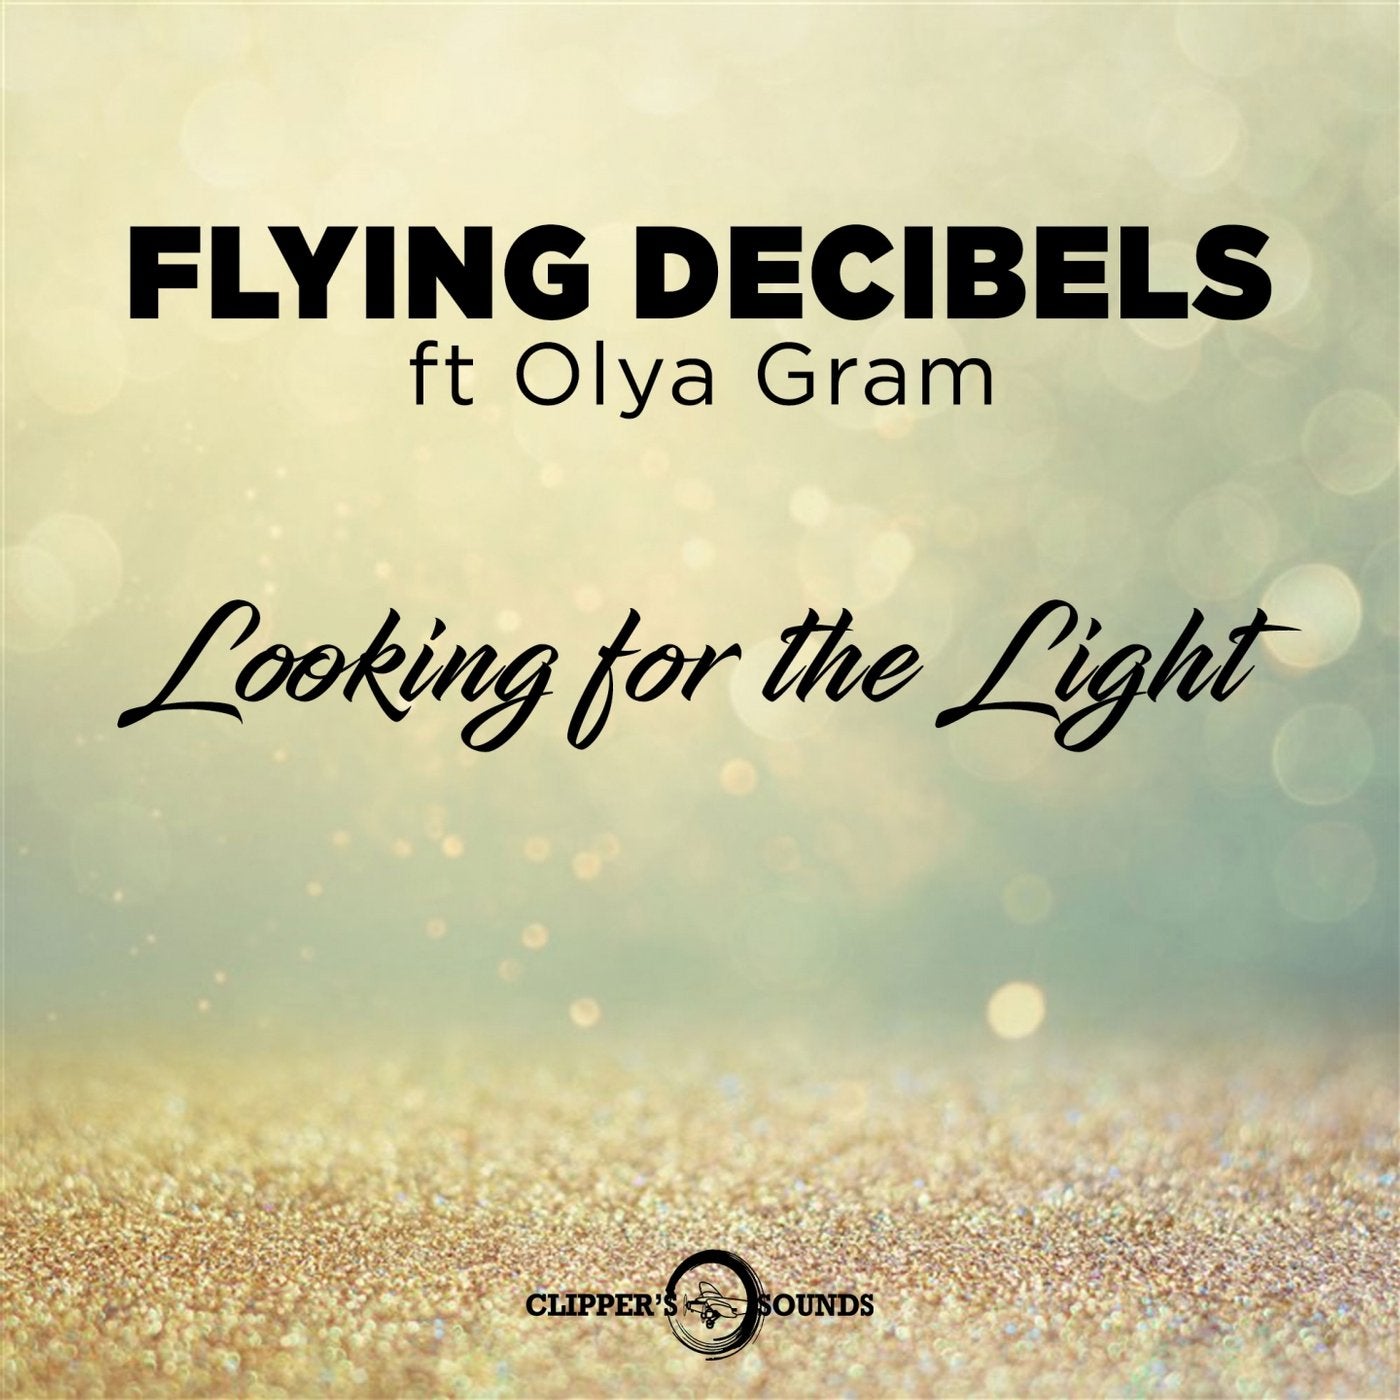 Looking for the Light (feat. Olya Gram)